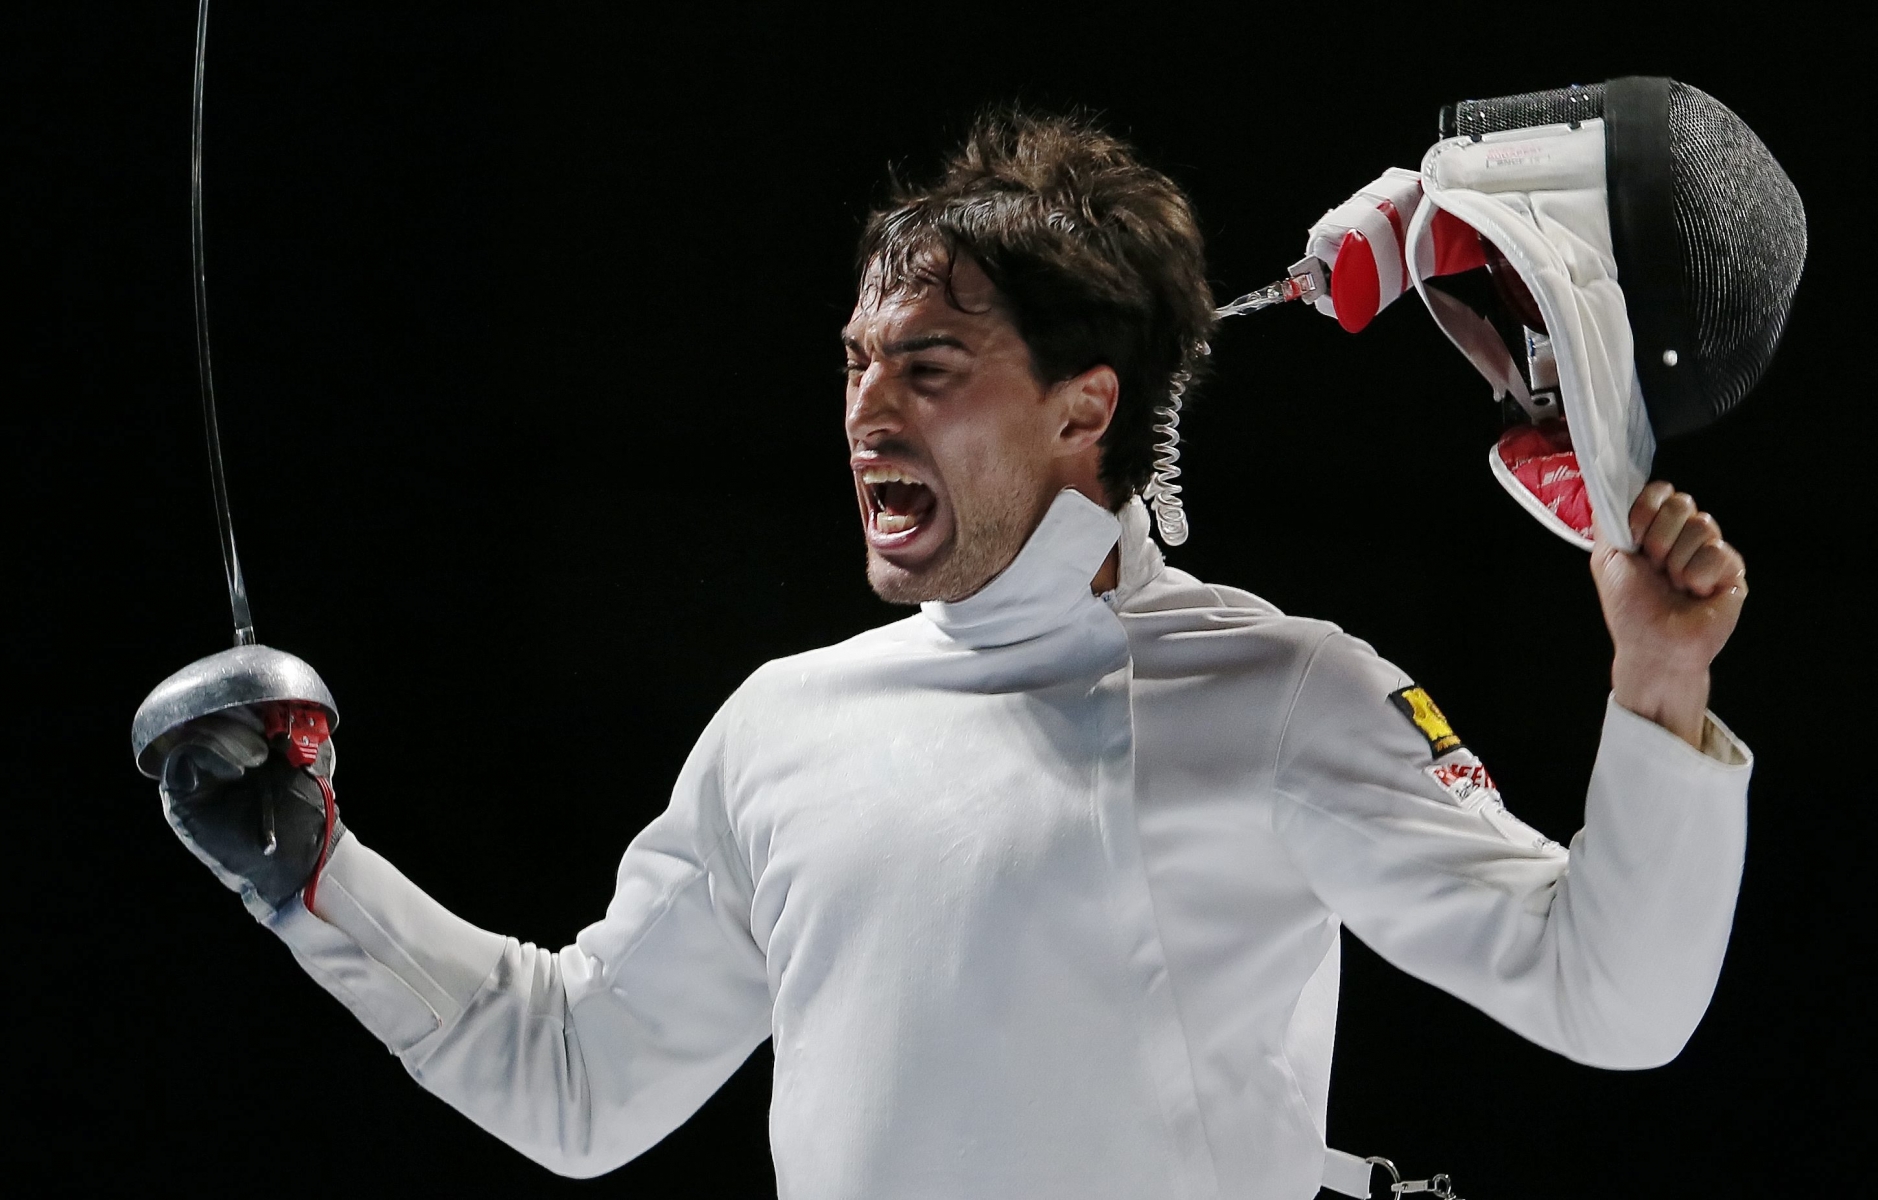 epa04852455 Max Heinzer of Switzerland reacts after his victory over Santarelli of Italy during their Men Epee Team semi final match for the World Fencing Championship in Moscow, Russia, 18 July 2015.  EPA/SERGEI ILNITSKYe FECHTEN WM 2015 MOSKAU